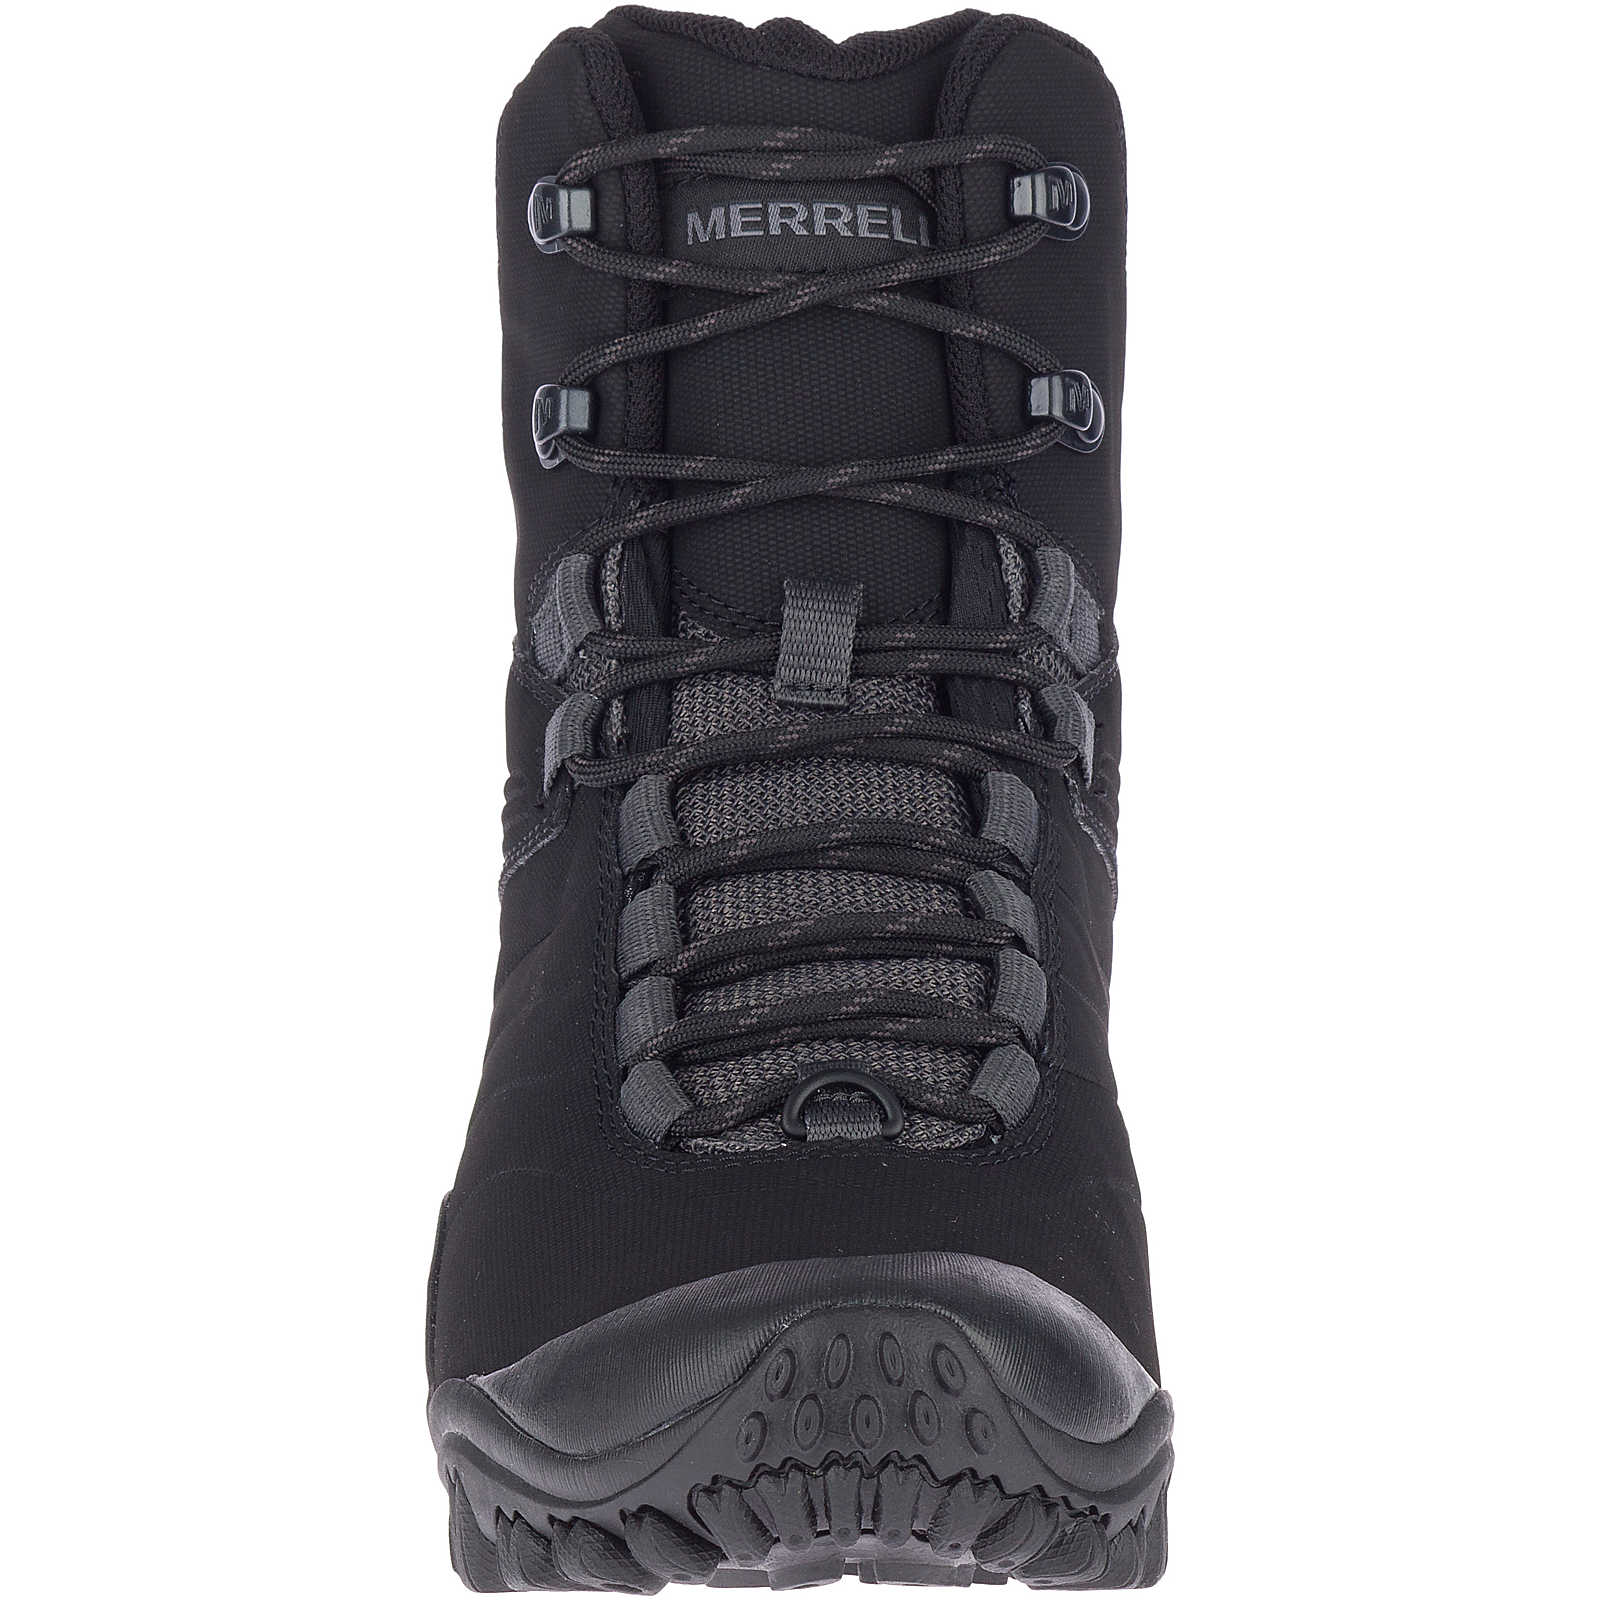 Chameleon Thermo 8 Tall Waterproof - Black